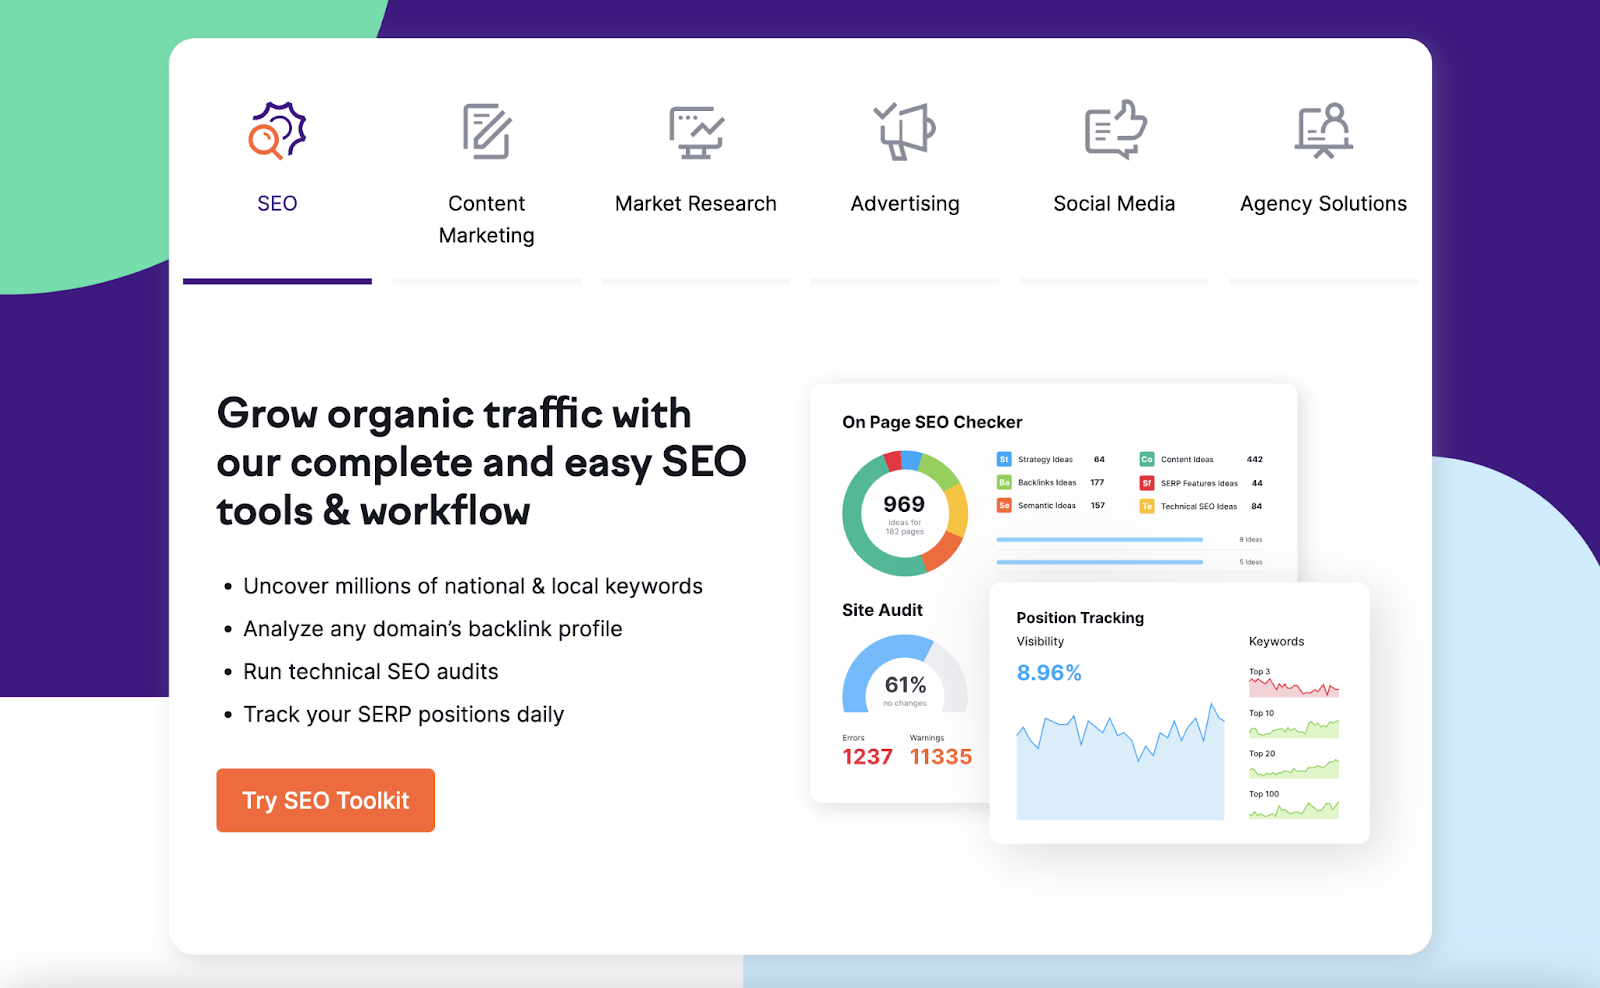 “SEO” section expanded on Semrush's site